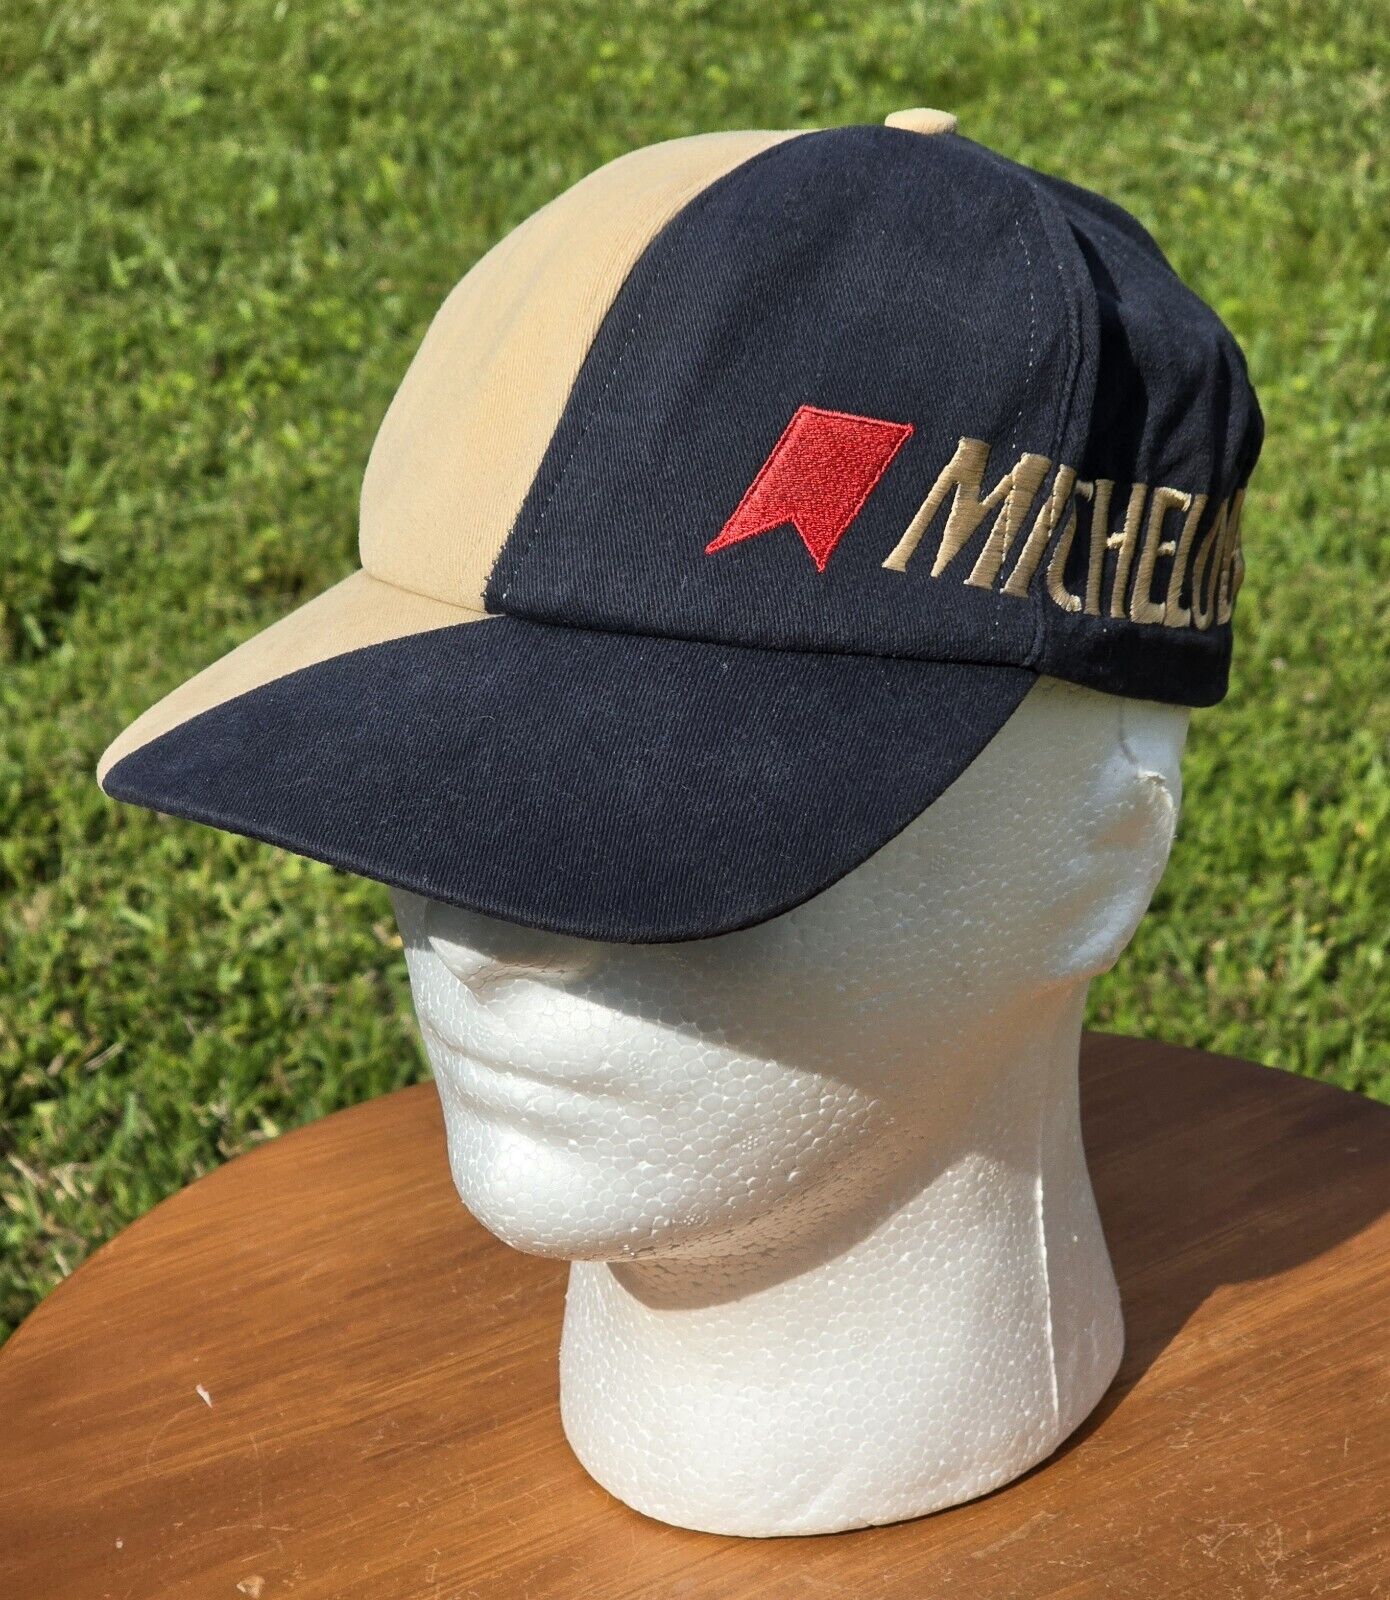 Vintage Michelob Snapback Hat Cap Two Tone Color Made USA Stylemaster